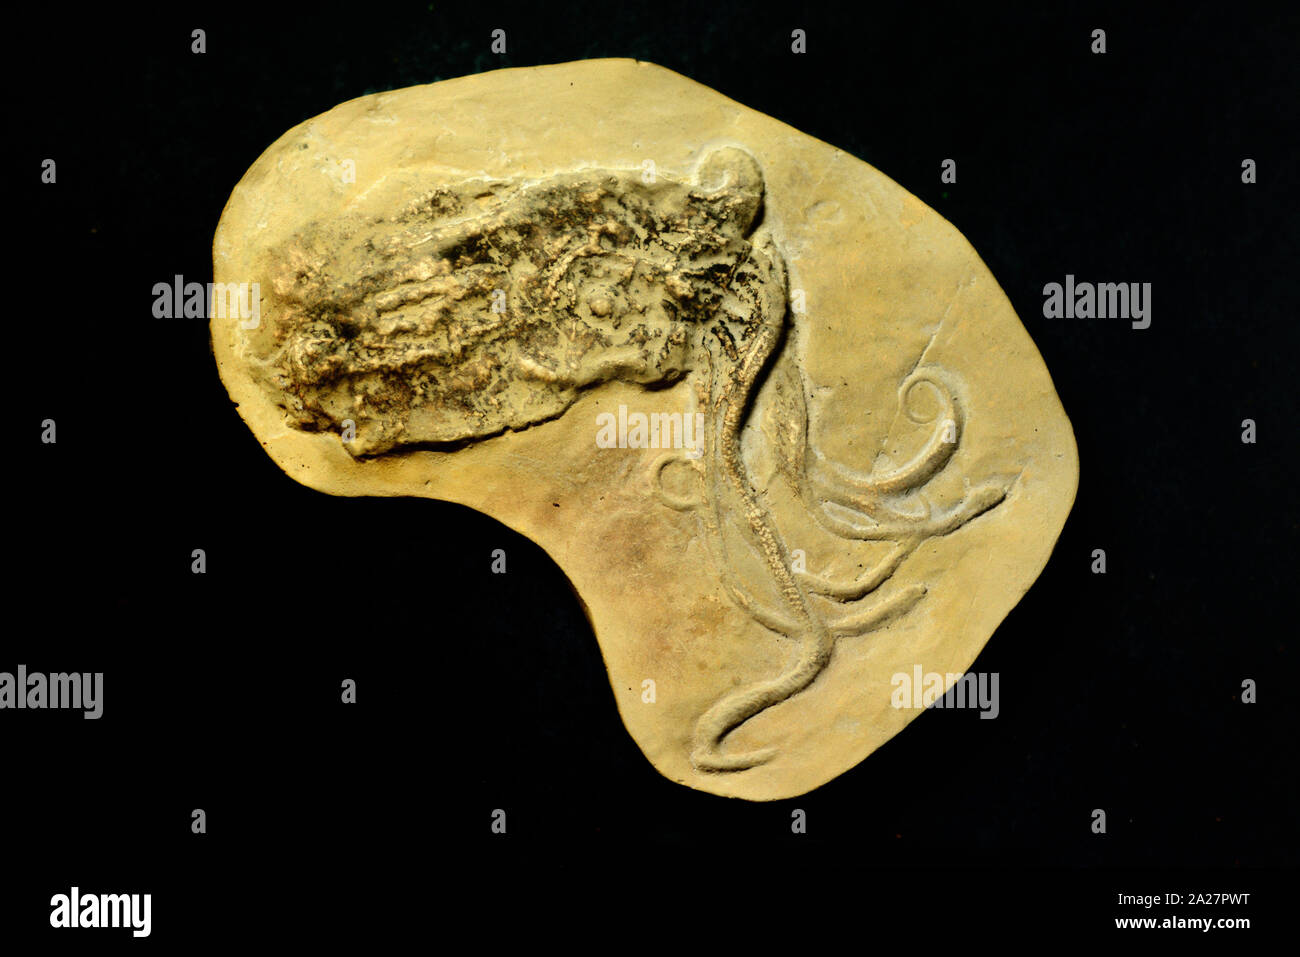 Proteroctopus ribeti Fossil, an Extinct Primitive Octopod or Octopus from the Jurassic Era 160MA found in the Ardeche Region France Stock Photo